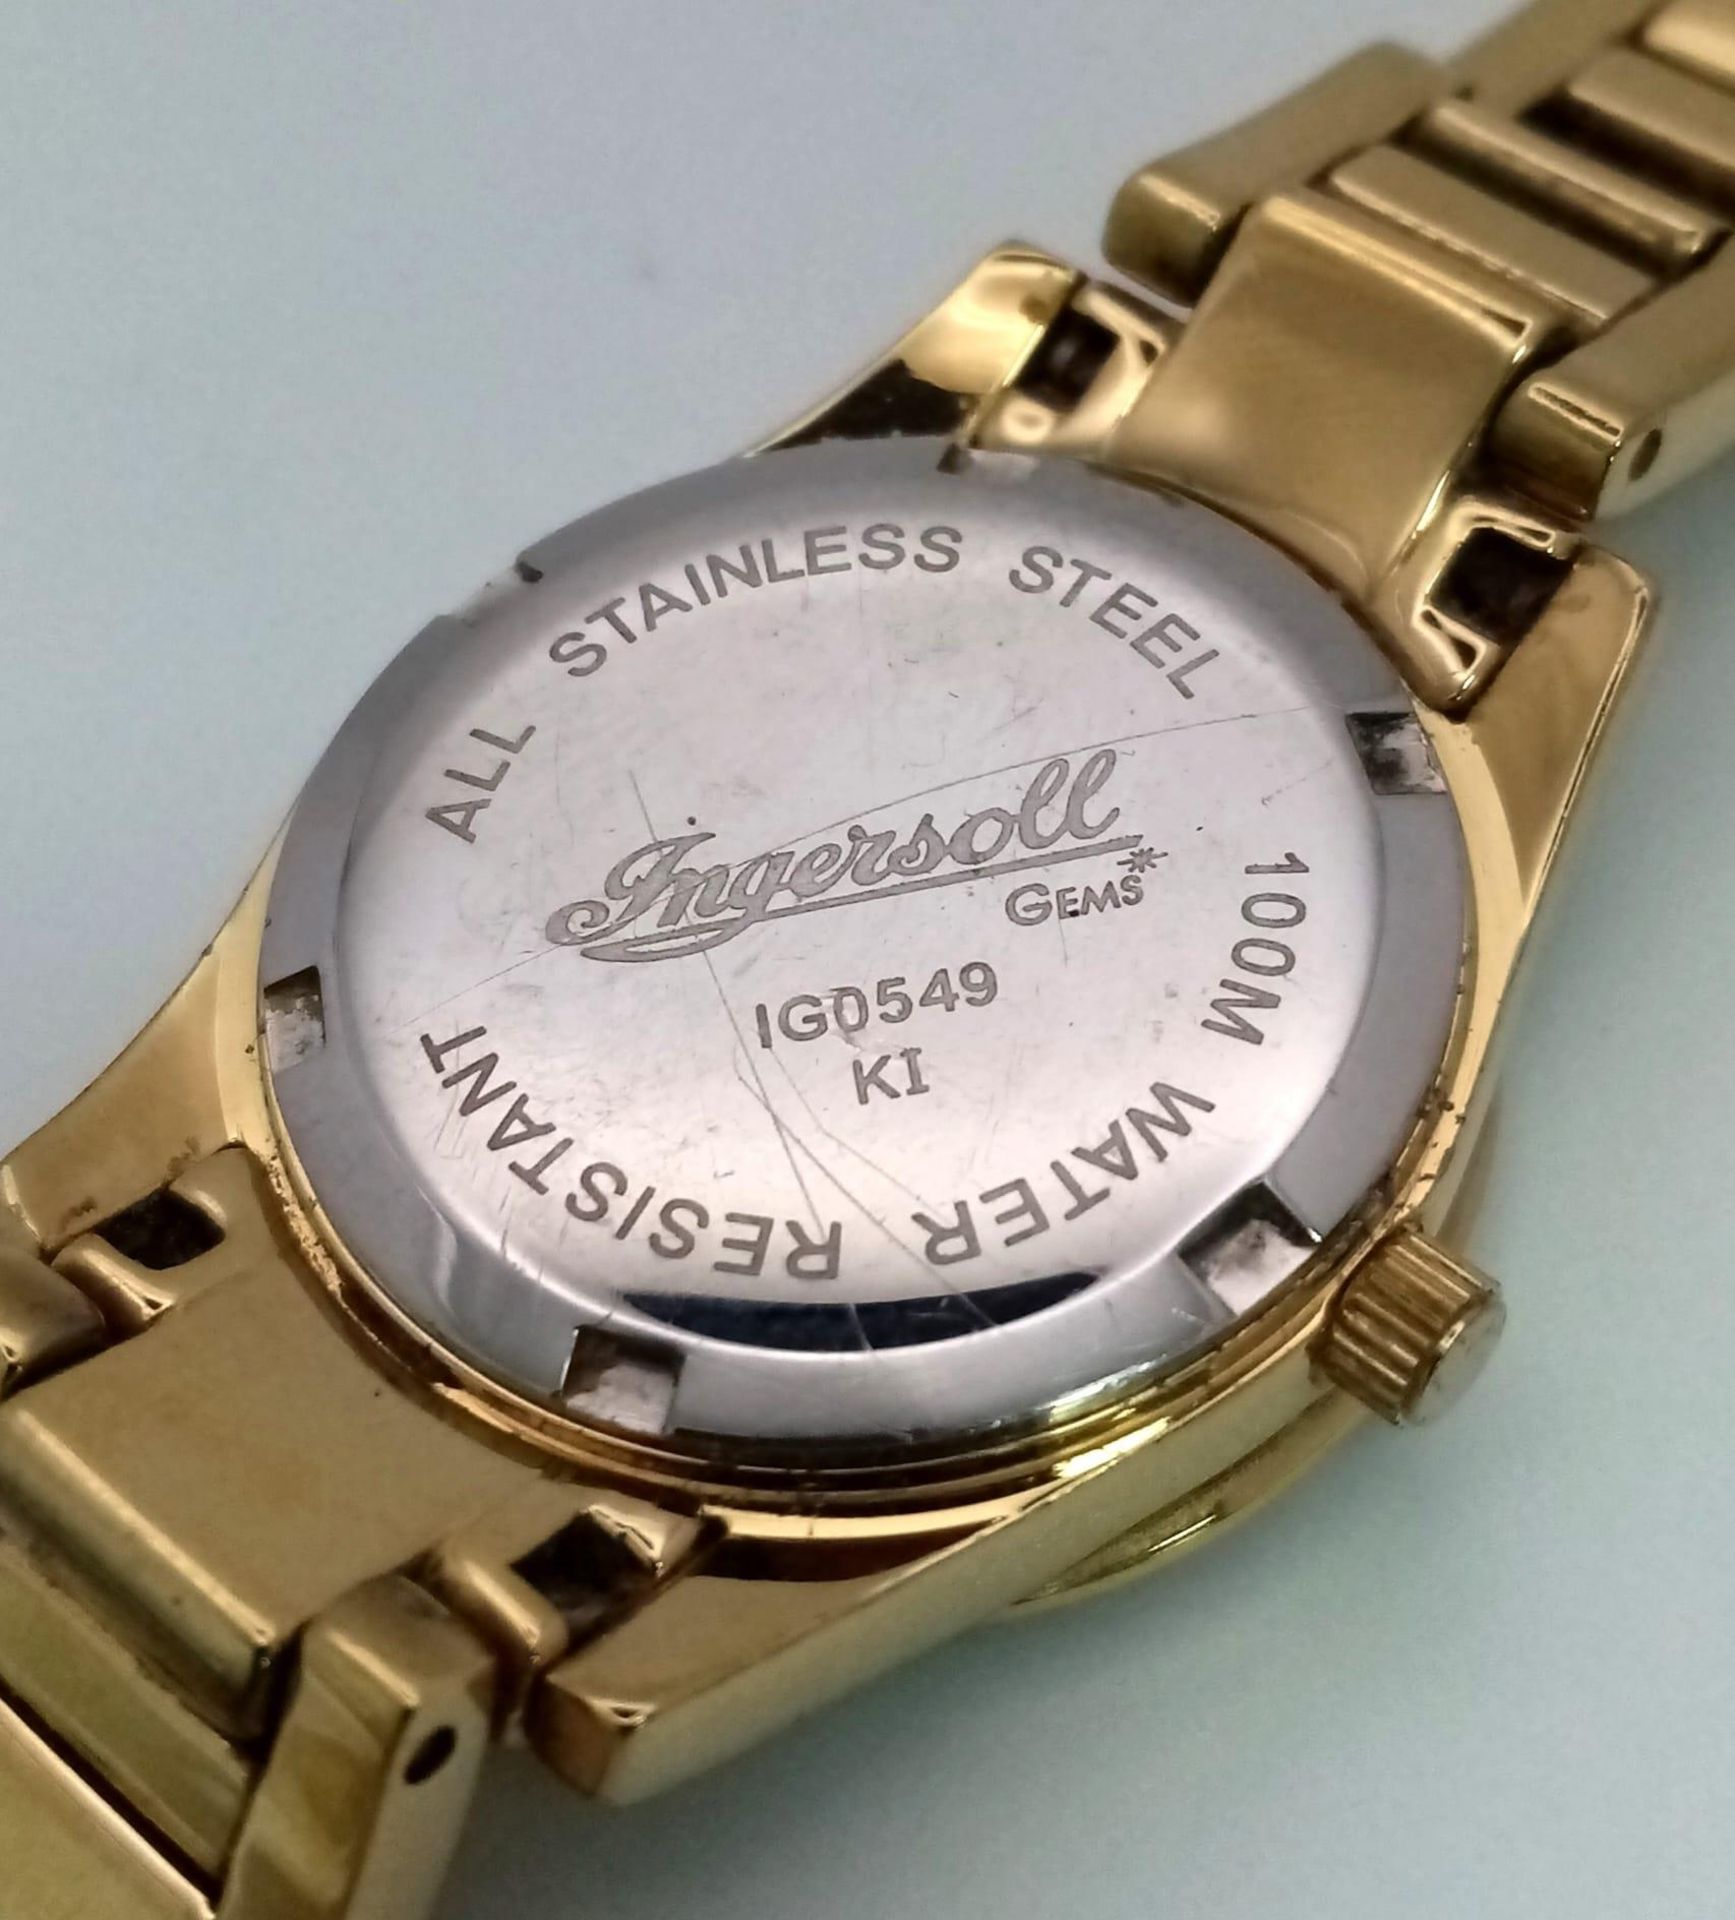 An Ingersoll Gold Plated Ladies Quartz Watch. Gold plated bracelet and case - 28mm. Gold tone dial - Image 5 of 5